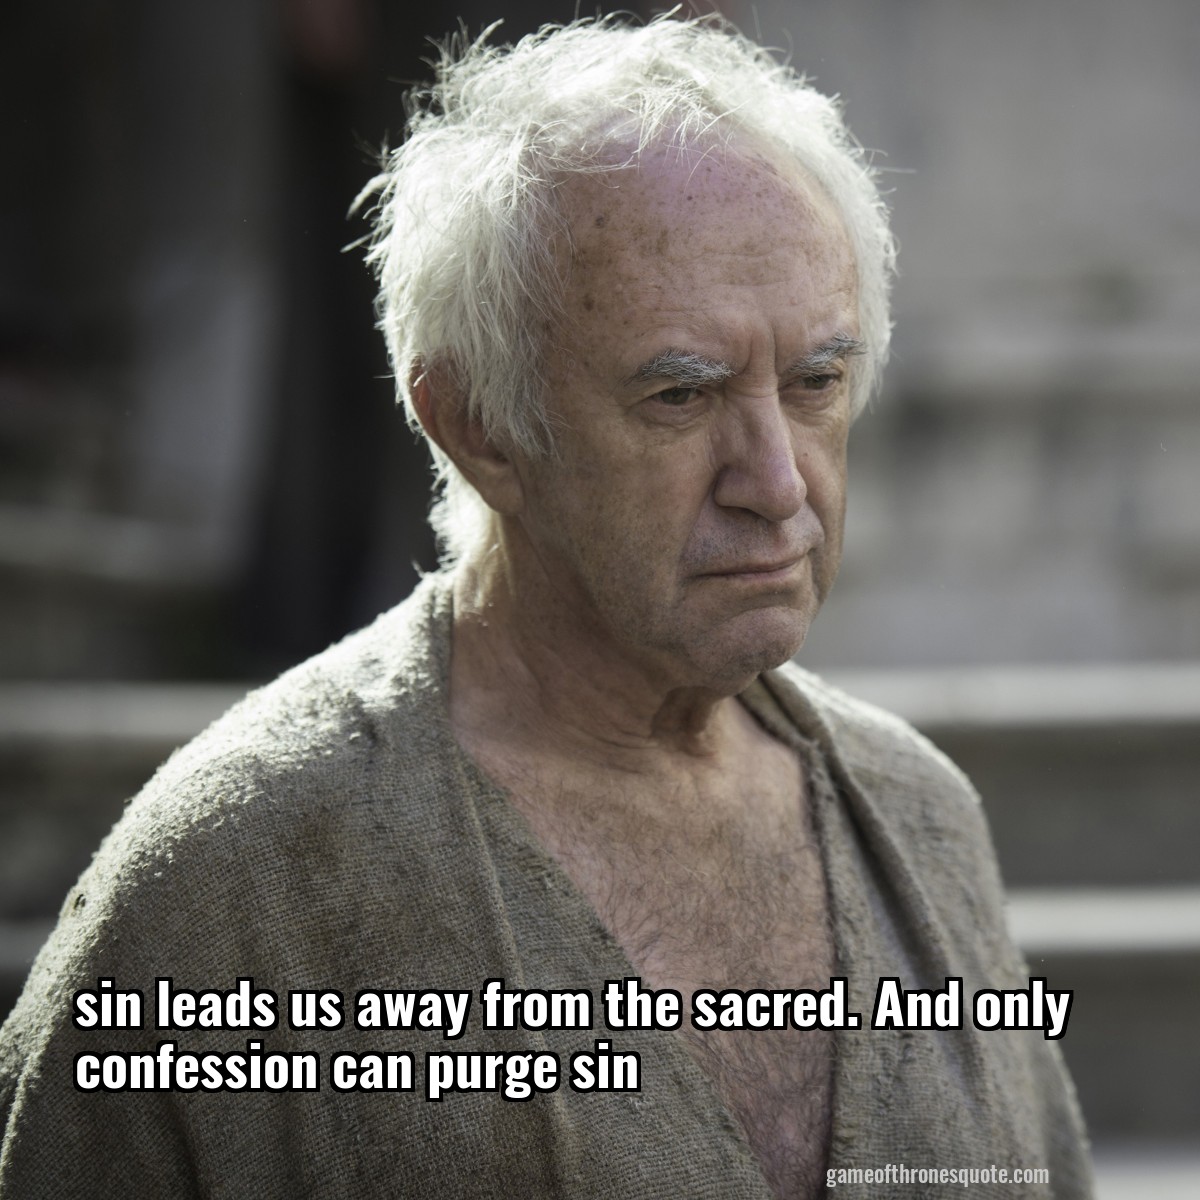 sin leads us away from the sacred. And only confession can purge sin